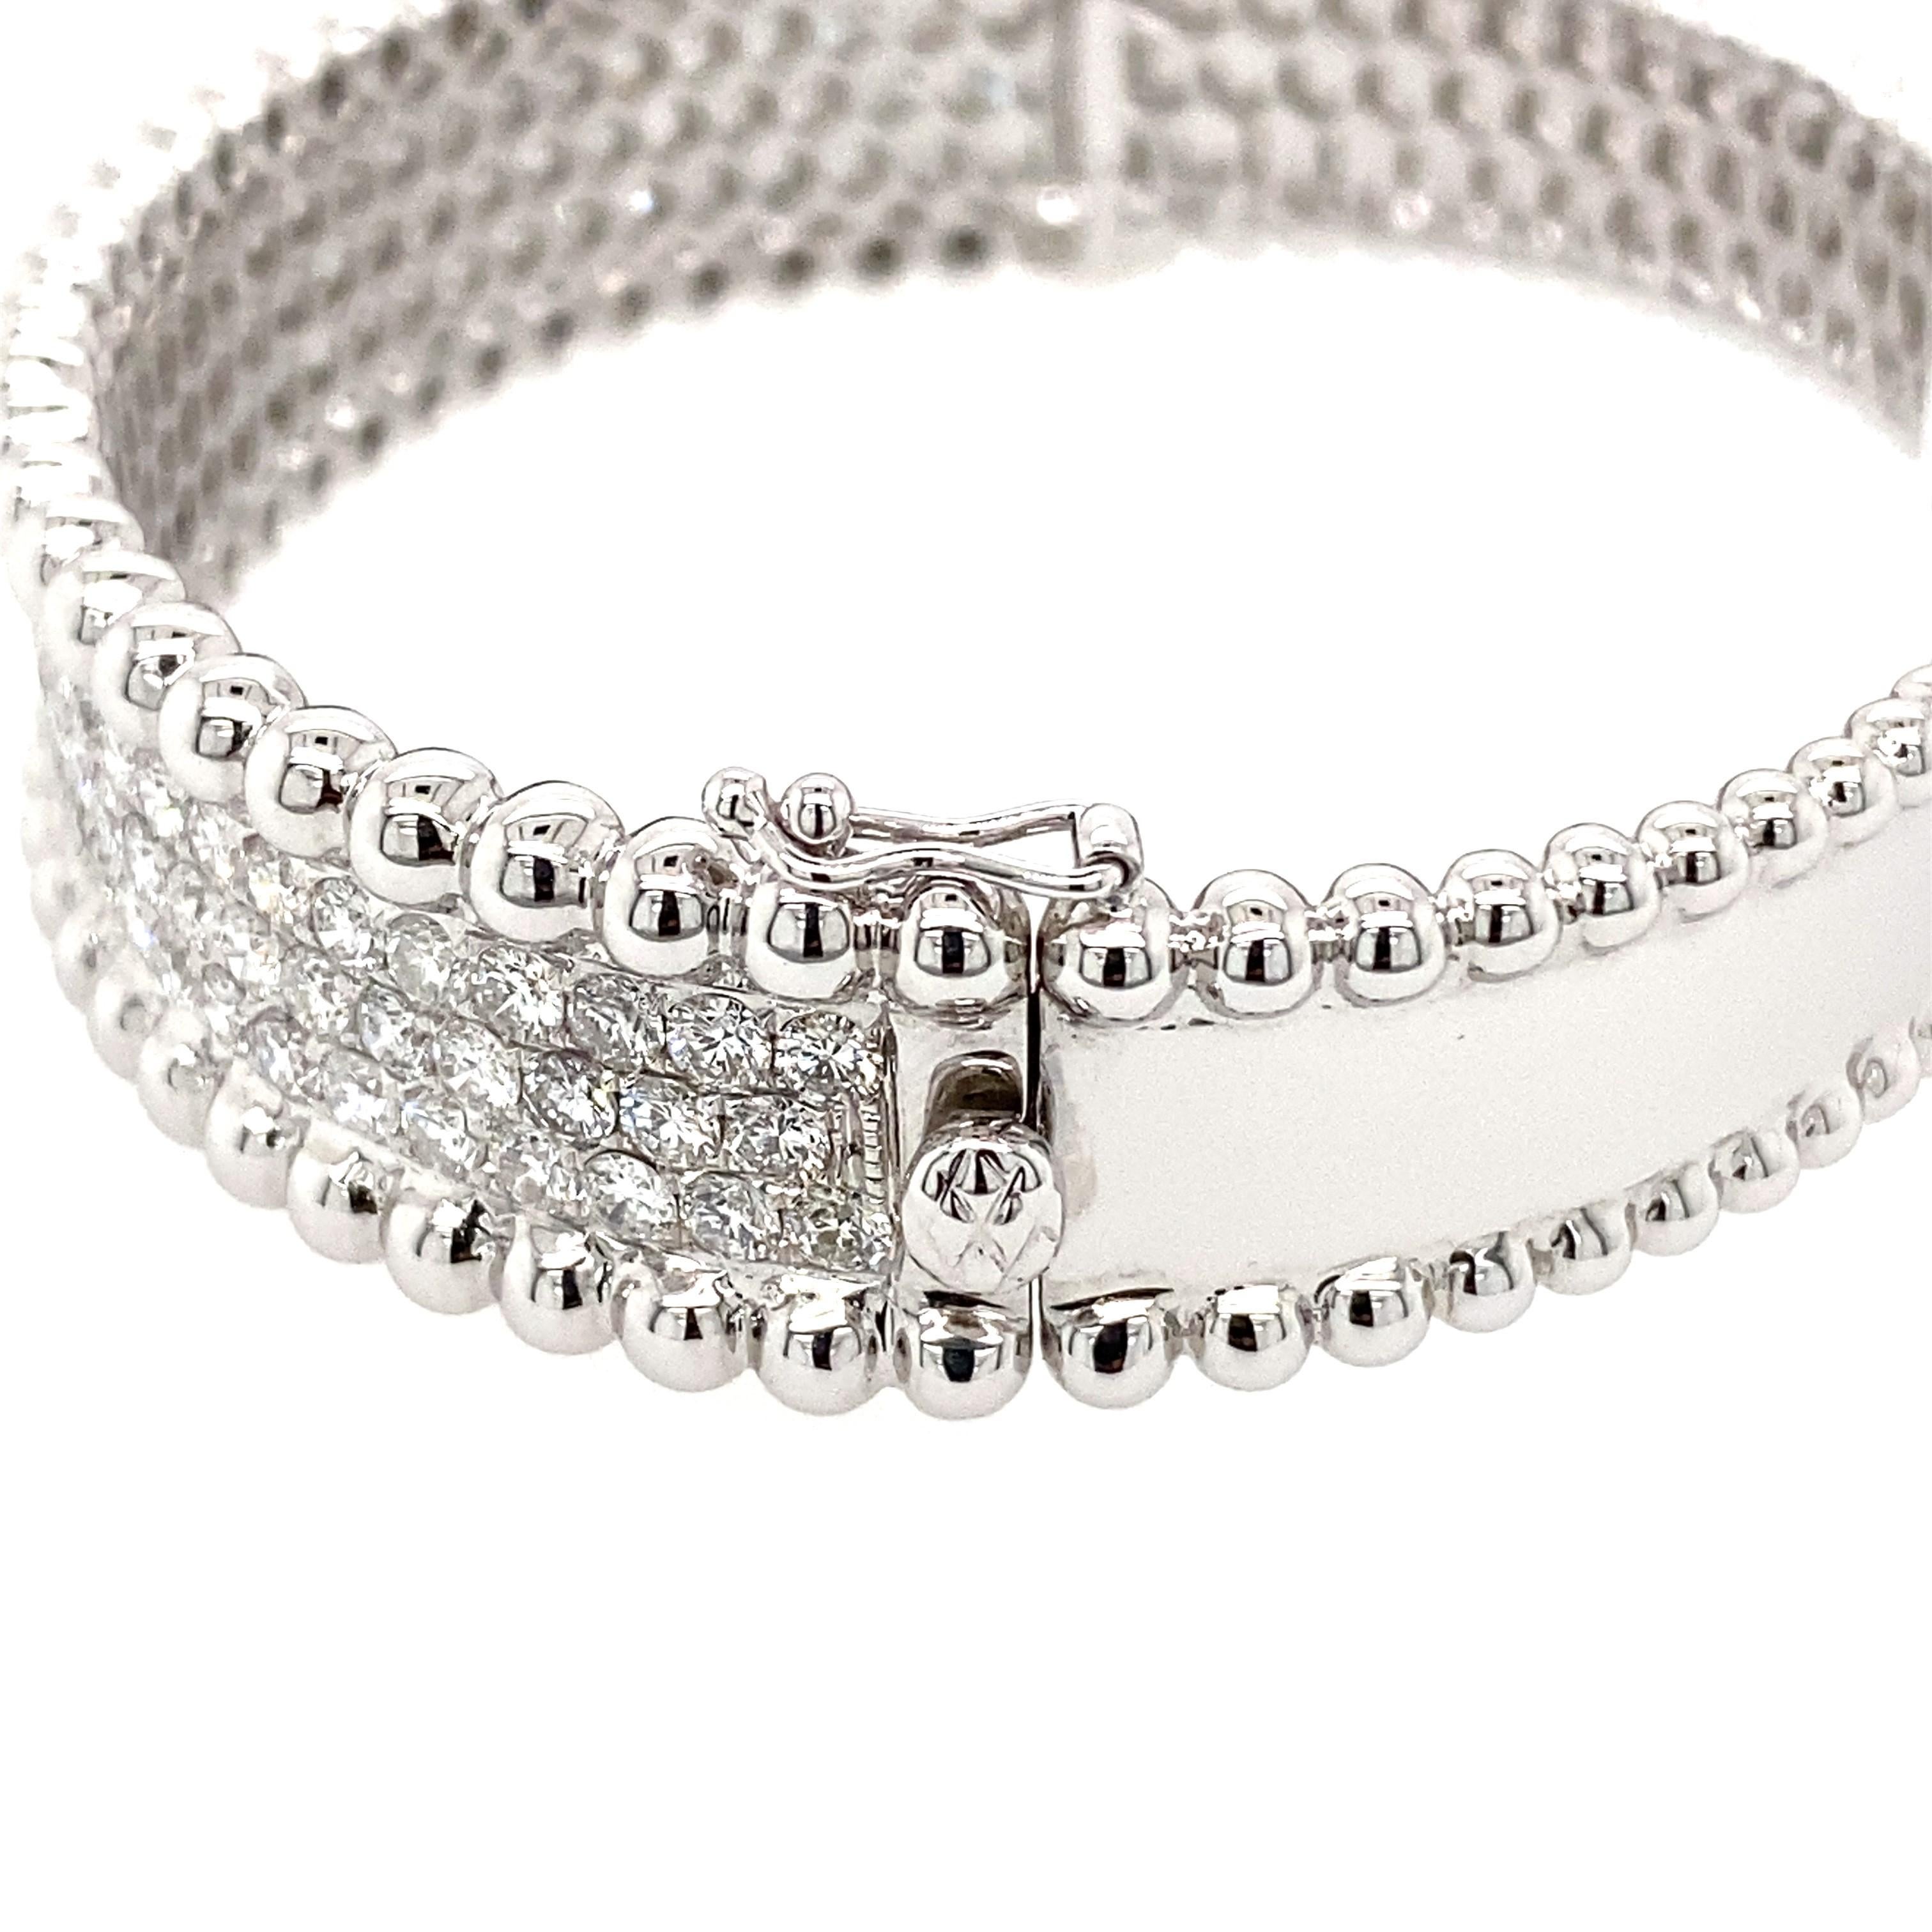 Oval Shaped 3 row Pave diamond hinged bangle with  beading on the top and bottom of the diamonds. 
Medium size, will fit an average size wrist - 6-6 3/4 inches. 
Safety clasp 

105 round brilliant diamonds 4.91 Carat total weight  
F-G/ VS-SI 
12 mm